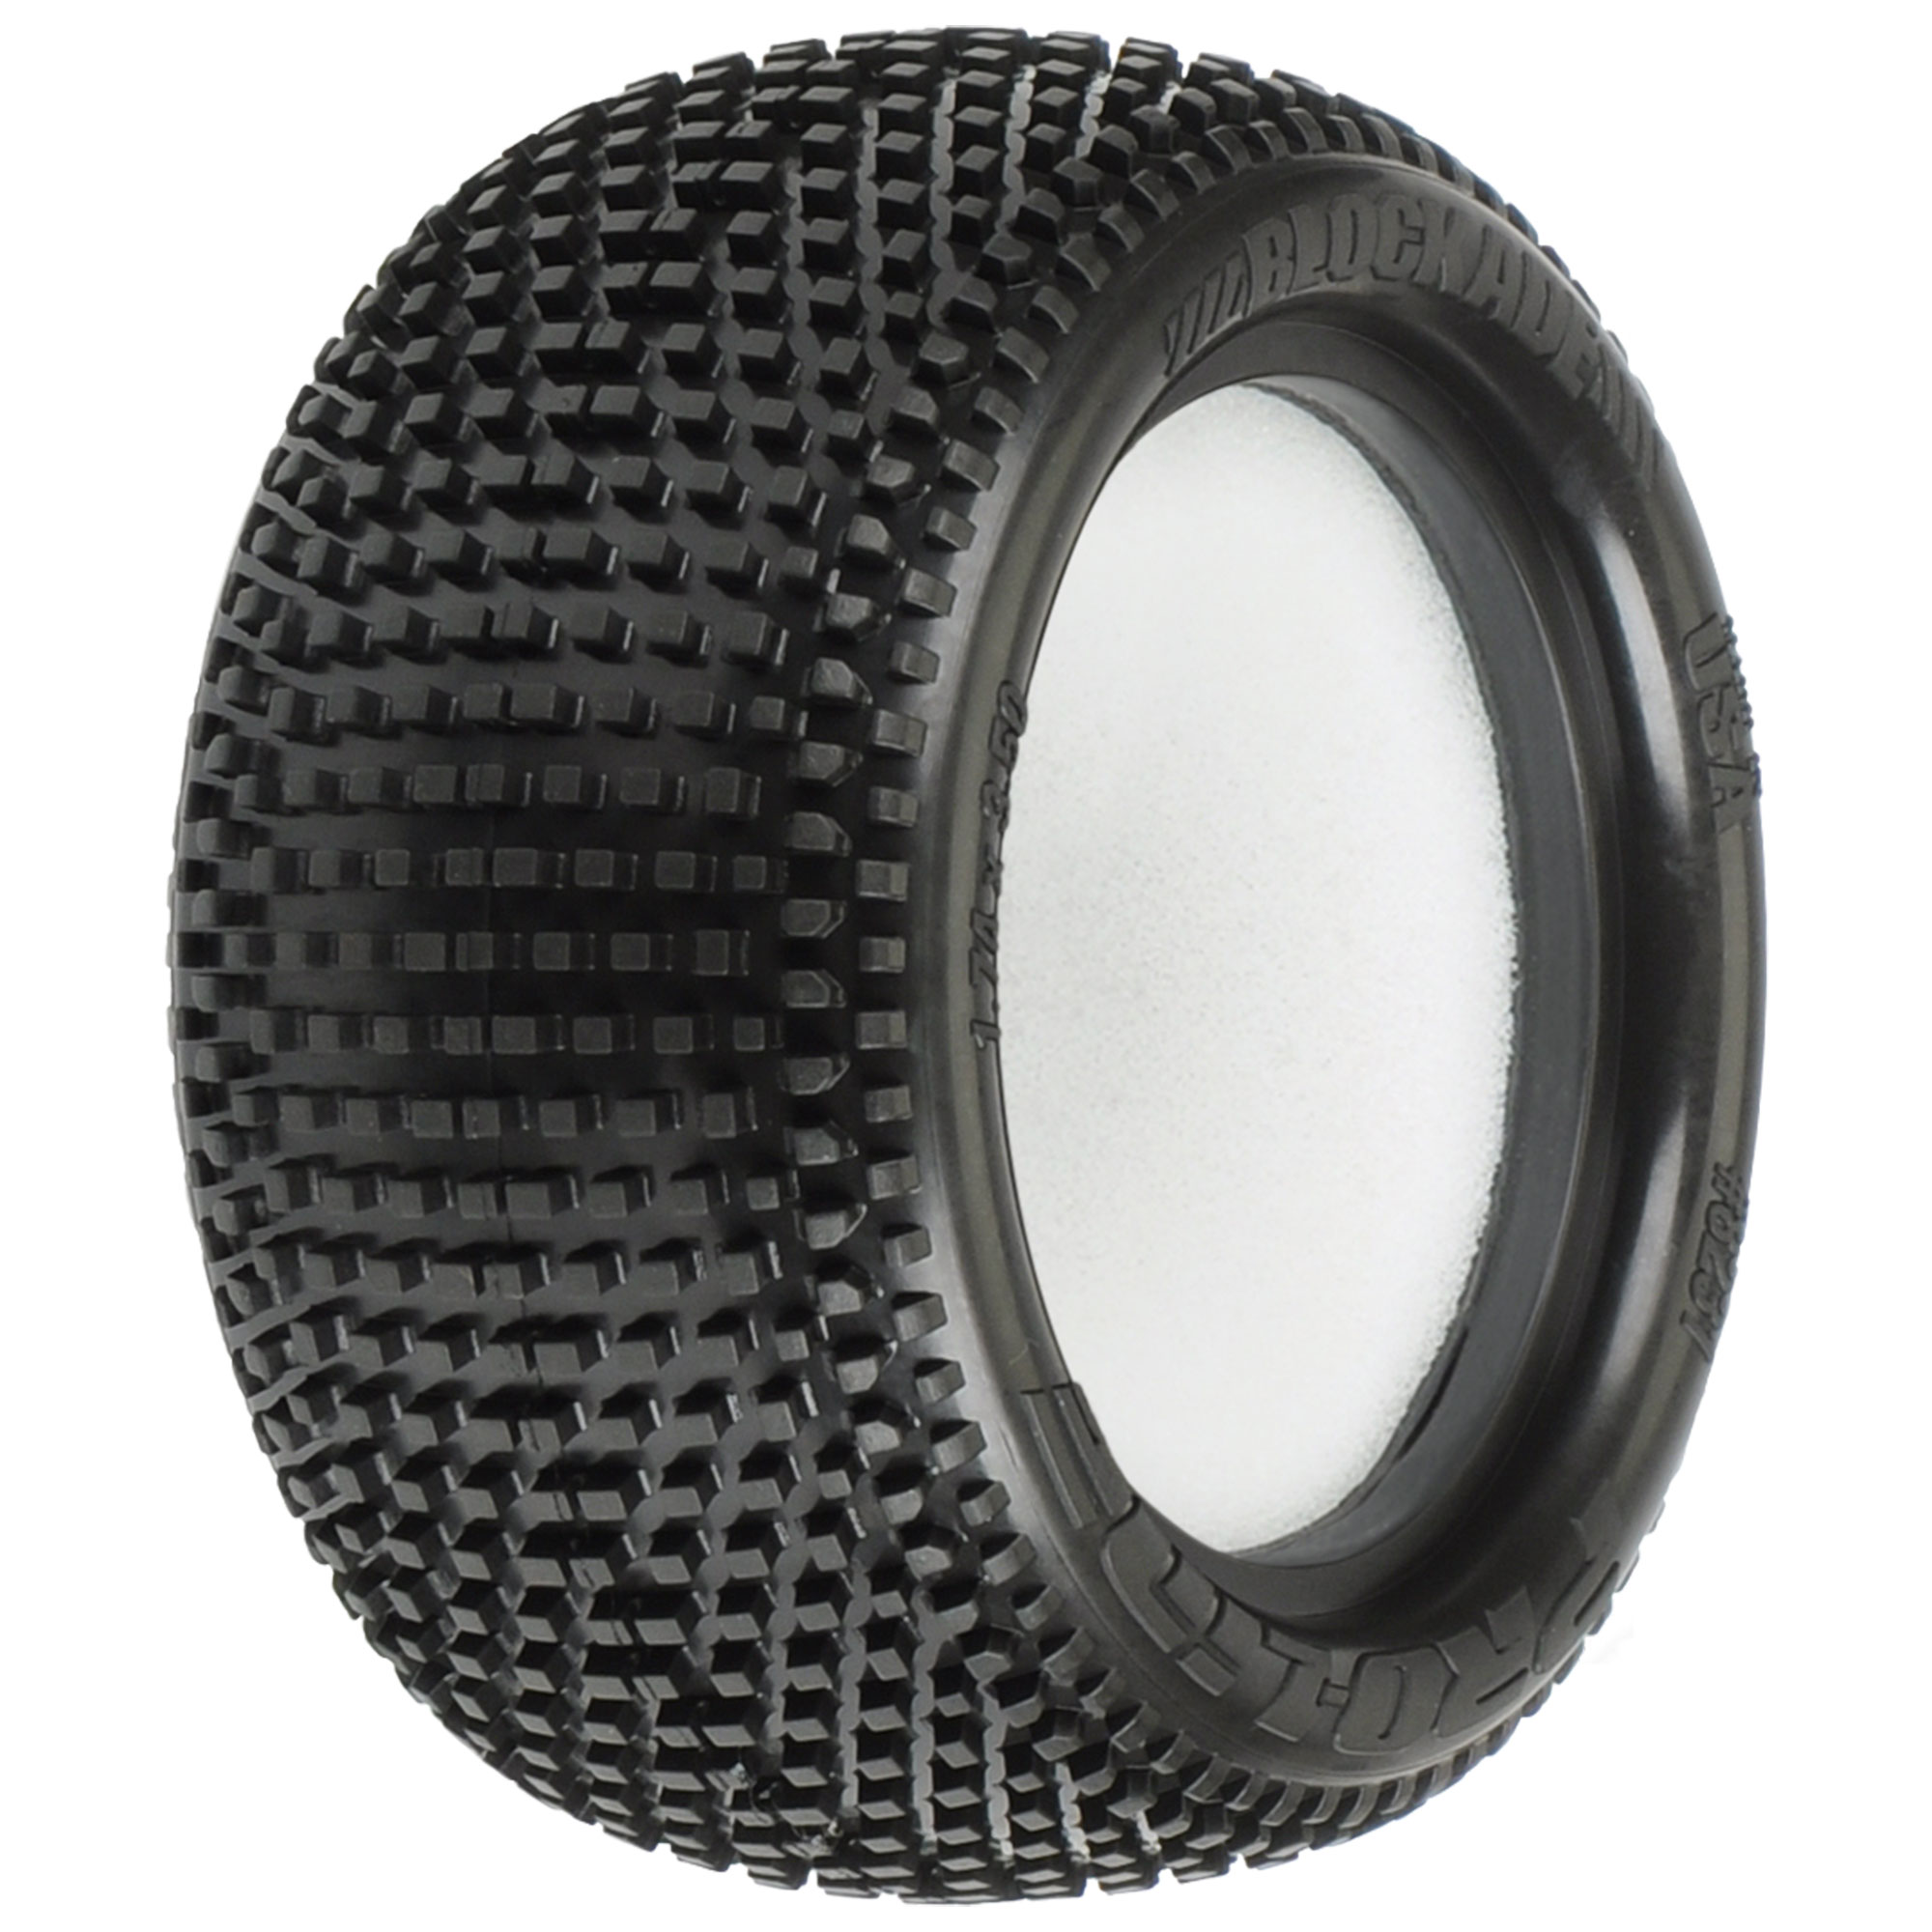 Pro-Line Racing 1/10 Shadow S4 Rear 2.2" Off-Road Buggy Tires 2 PRO8286204 Tires 